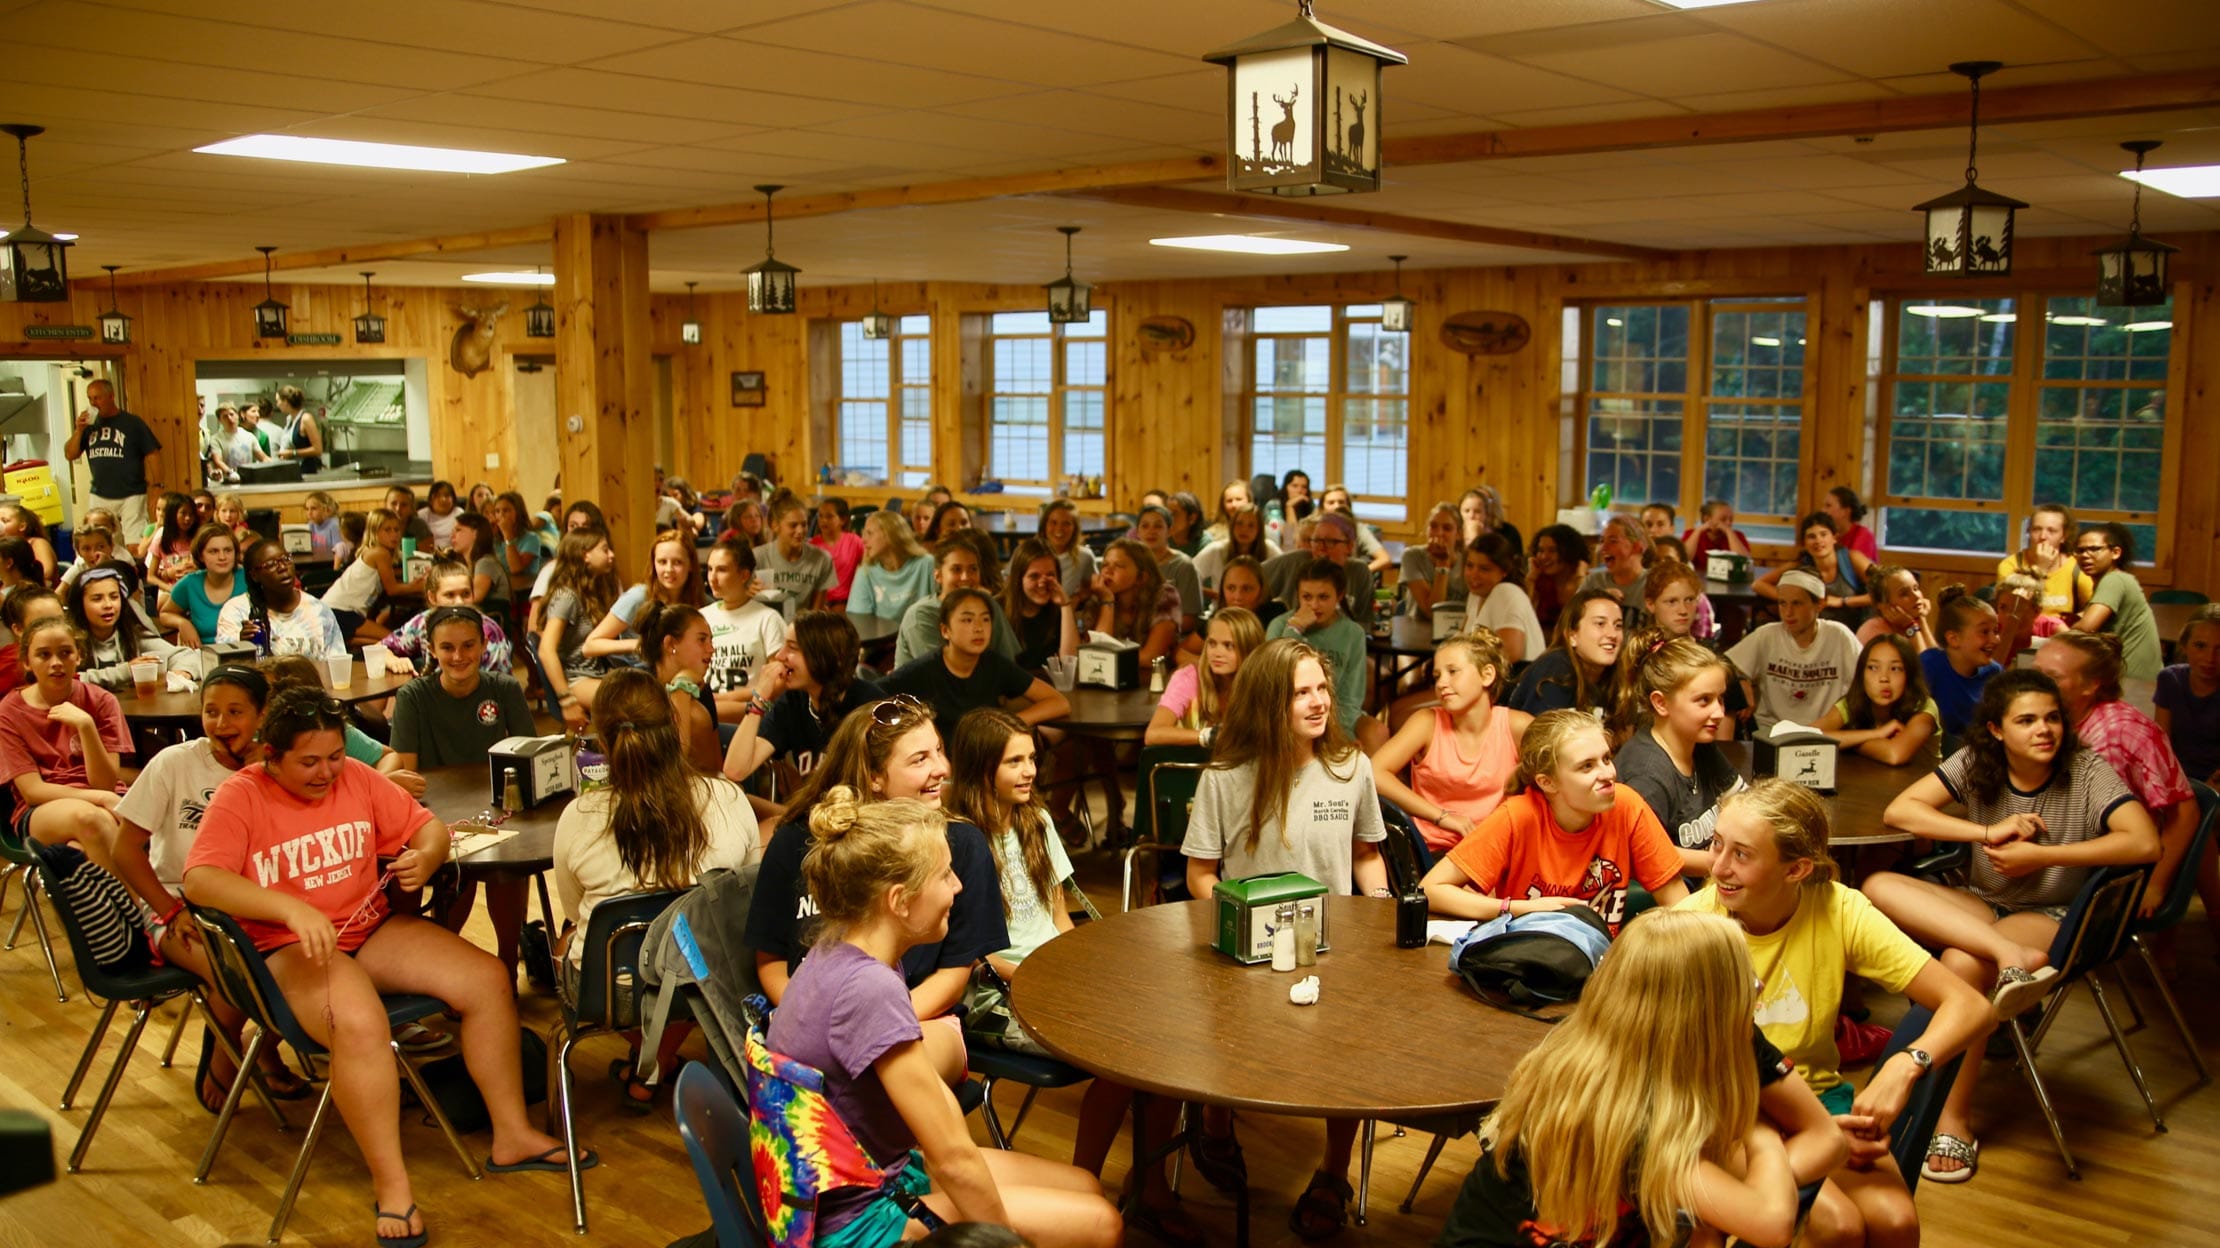 Campers and staff eating a meal in the dining hall